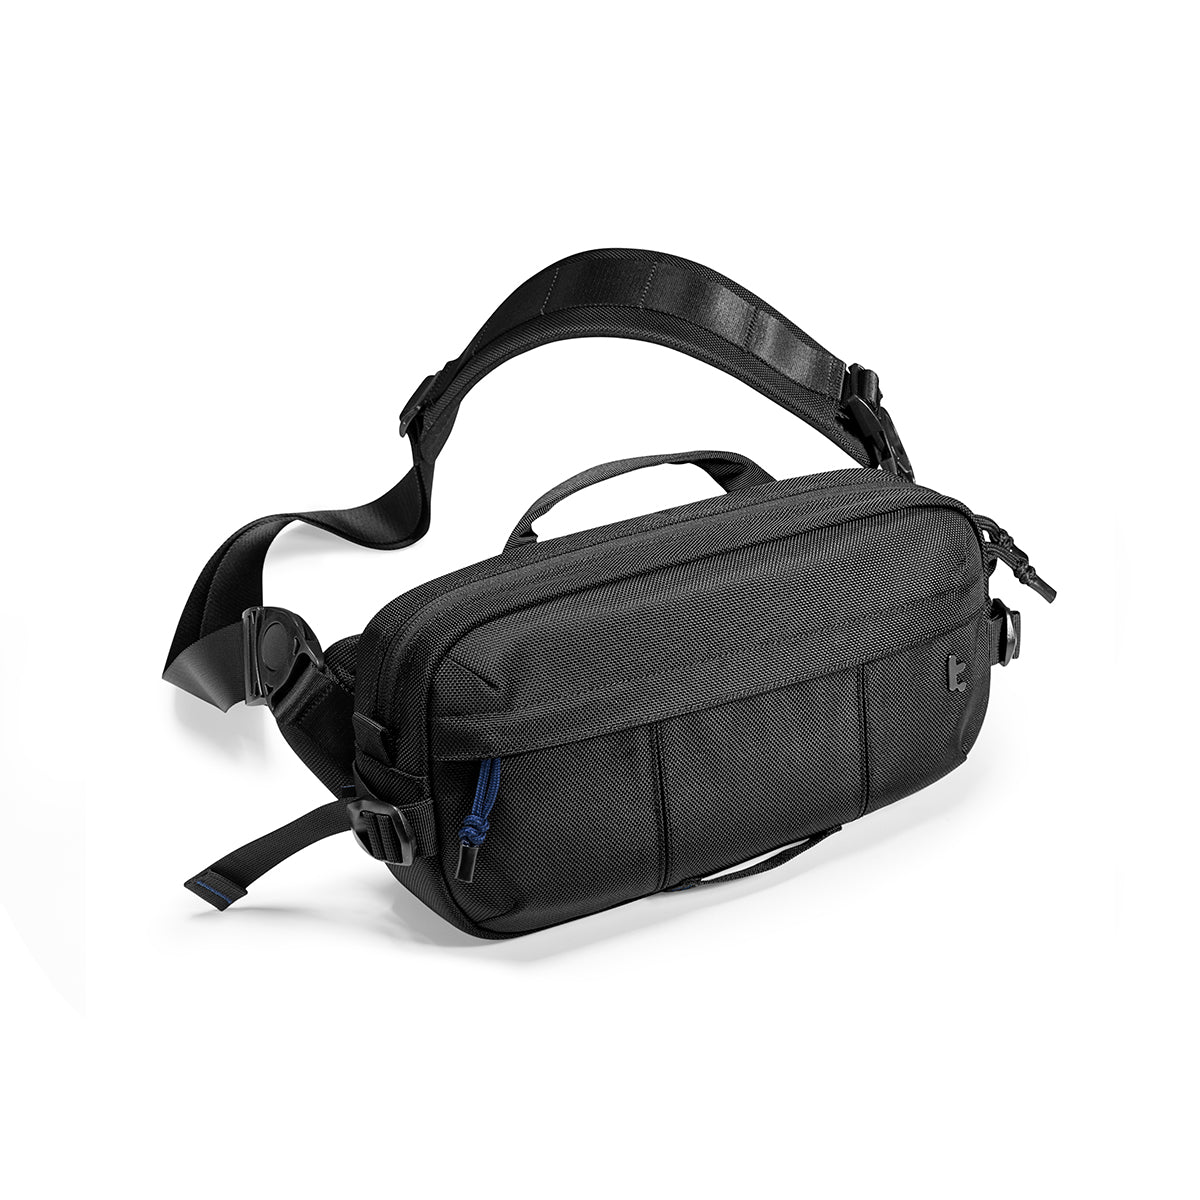 Tomtoc Wander-T26 Daily Sling Bag